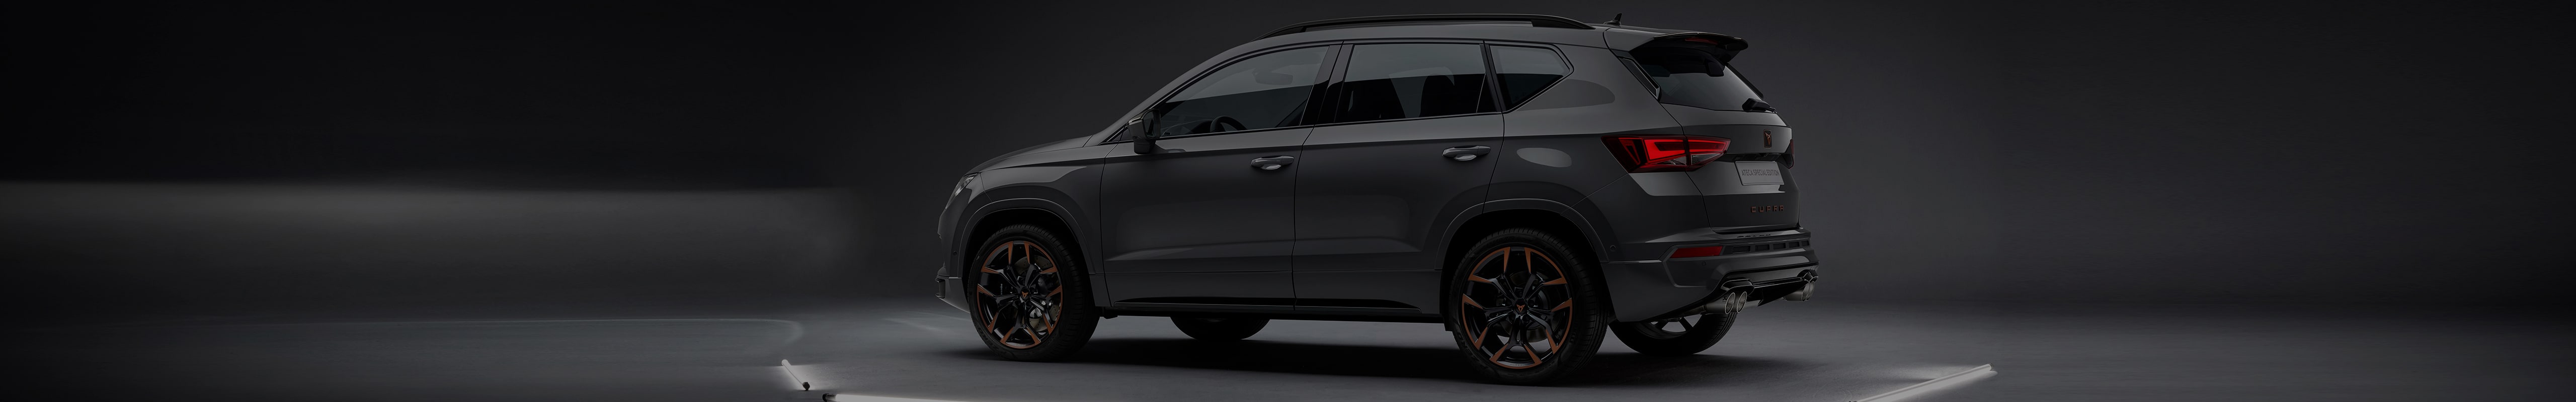 CUPRA Ateca Special Edition is here.